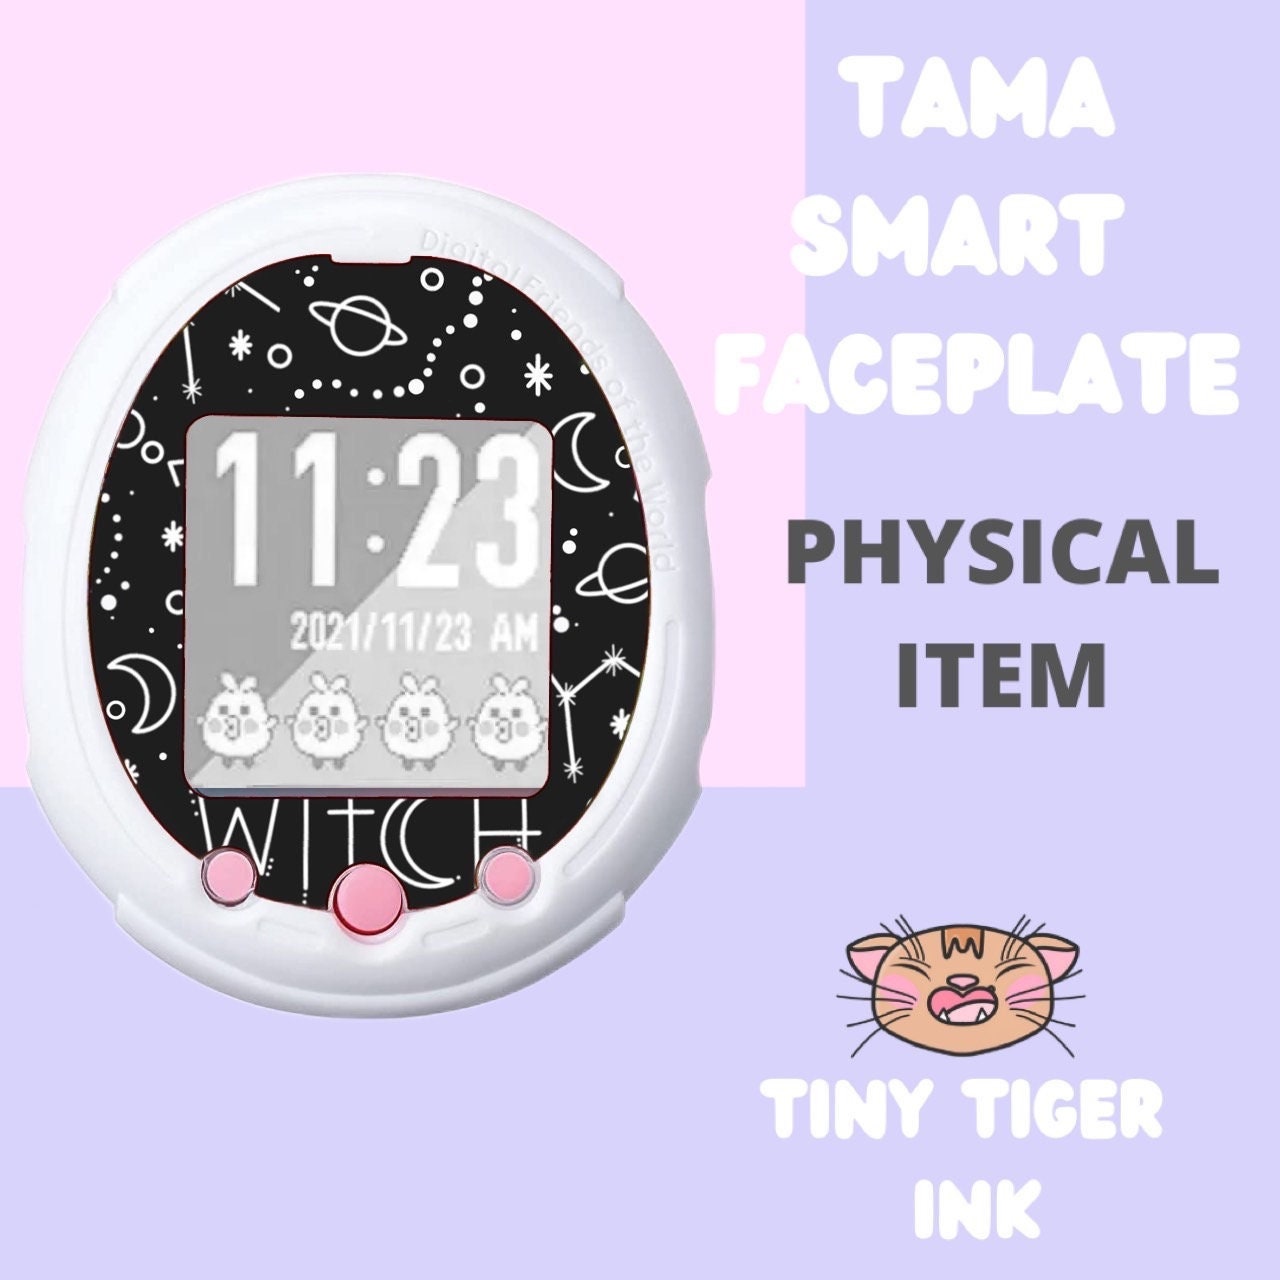 Tamagotchi Smart Watch Faceplates - Witch without Star